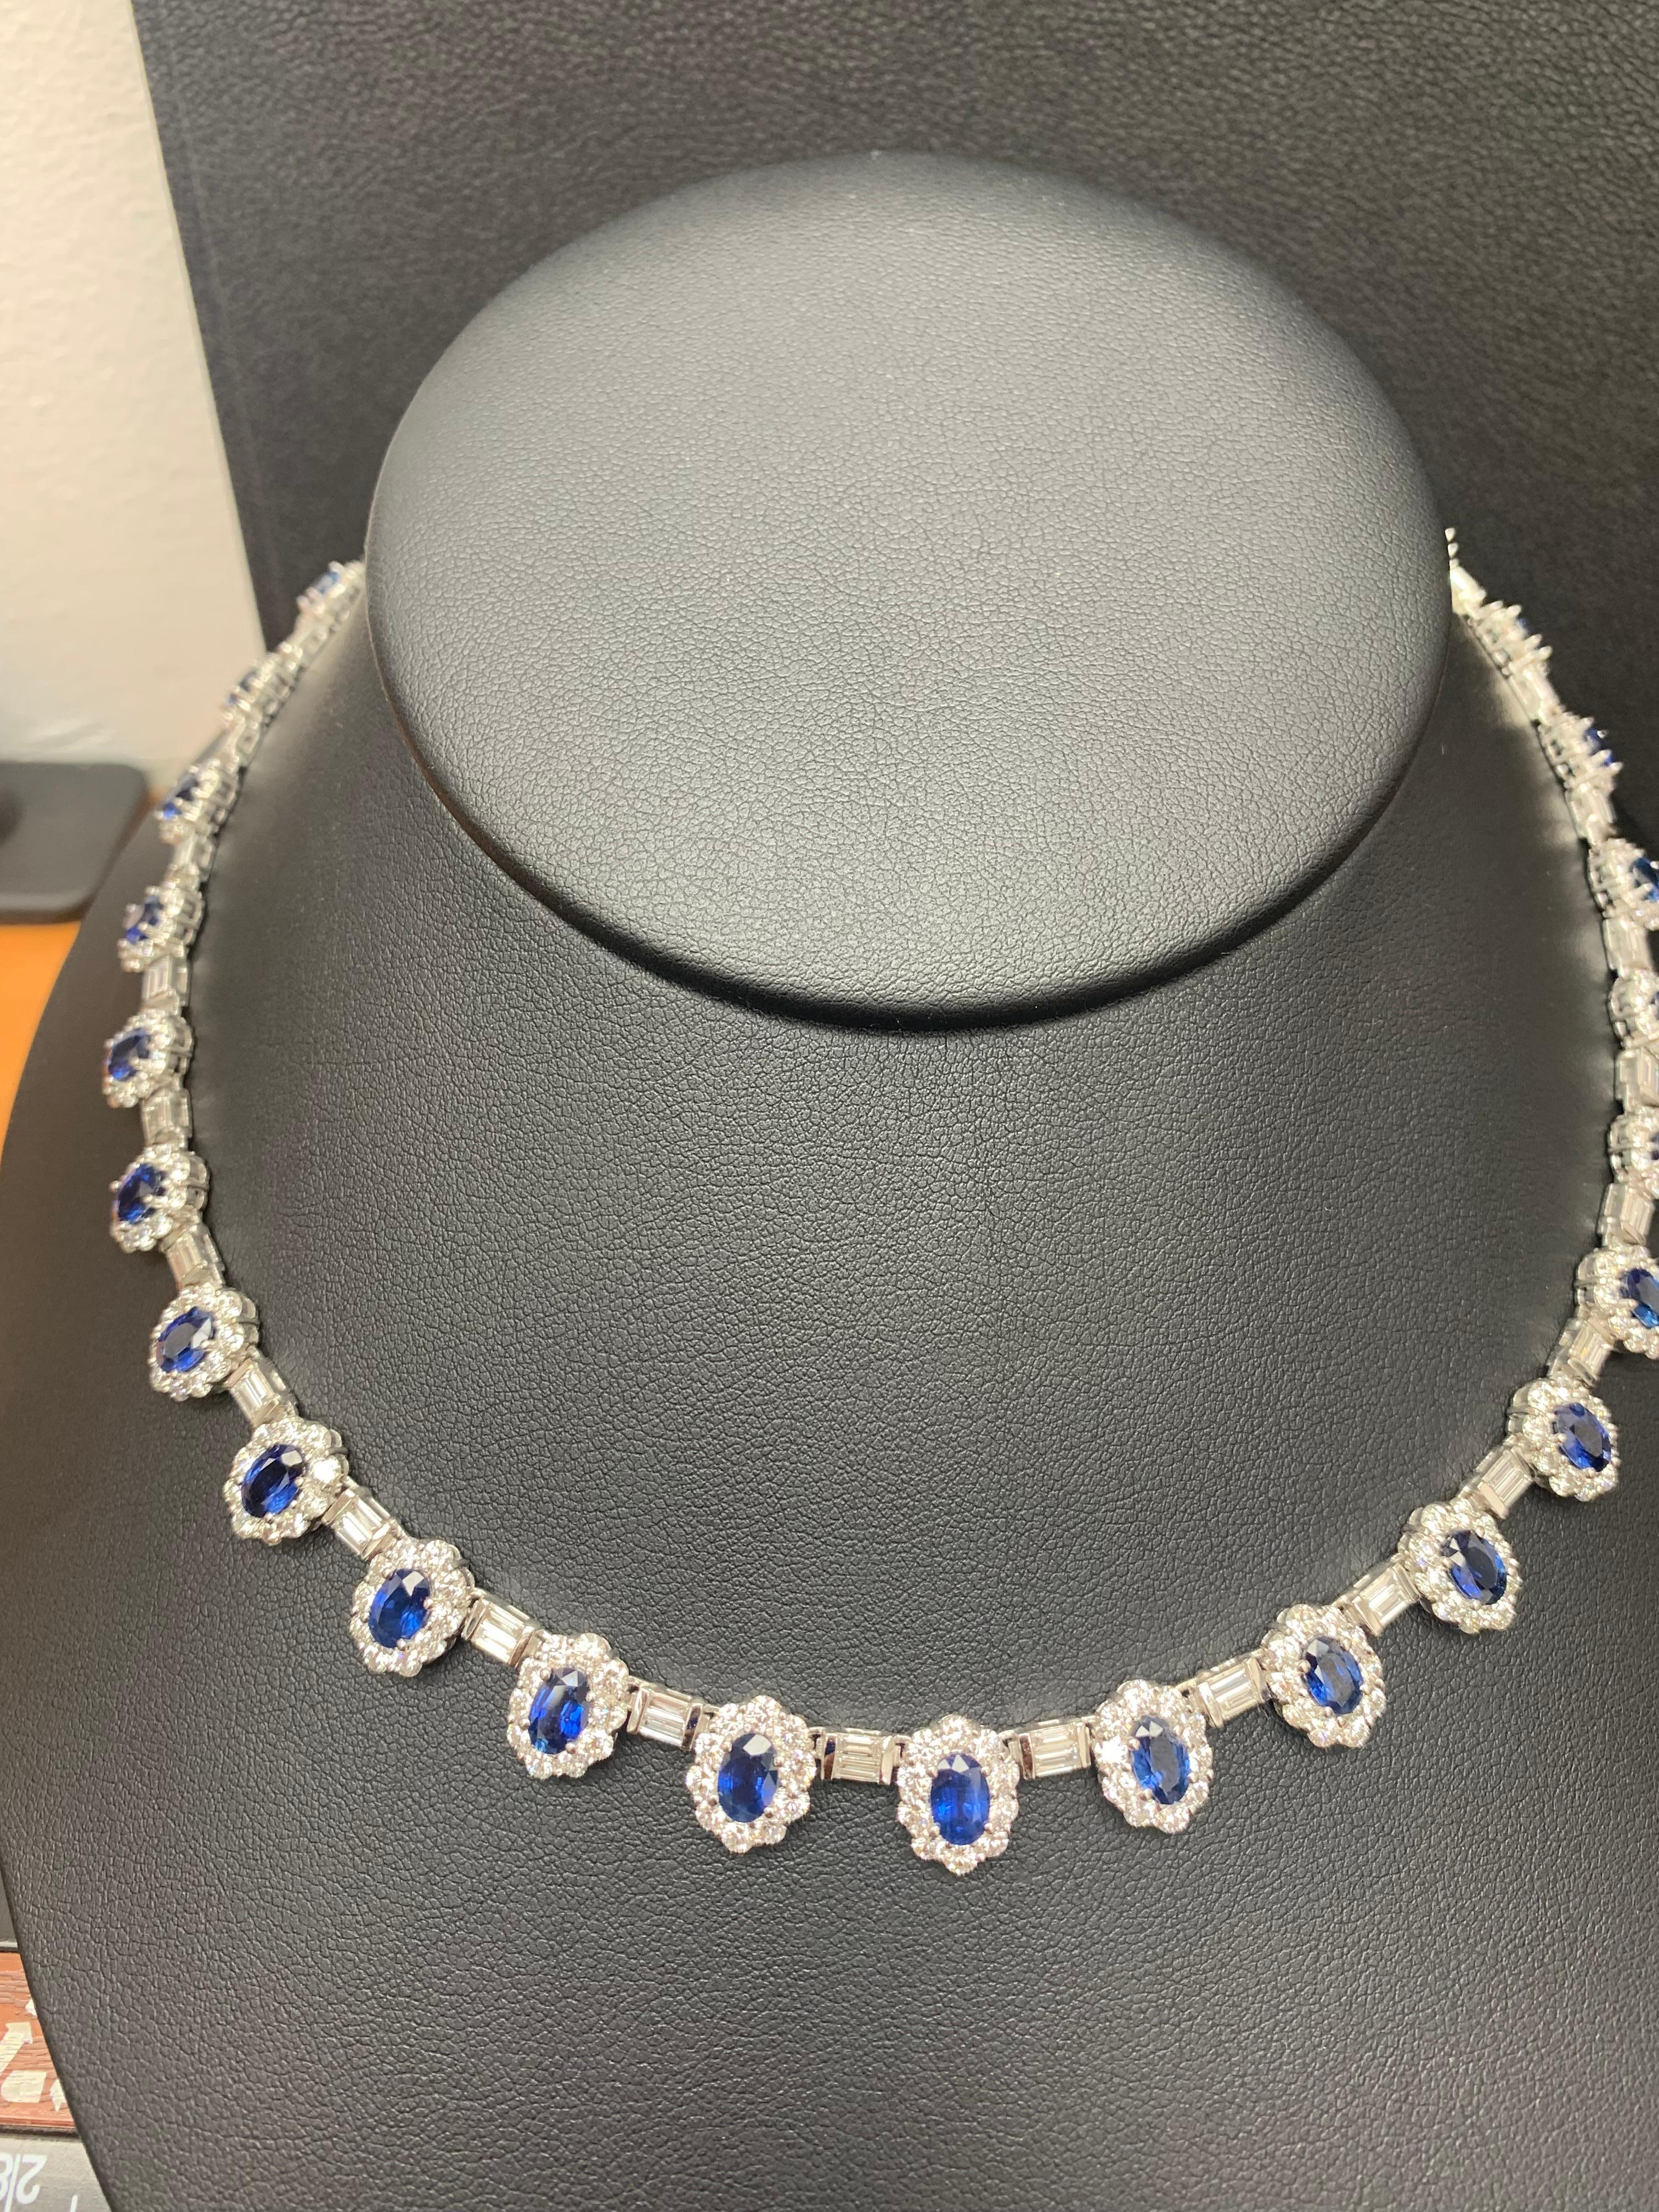 A unique and chic necklace showcasing 31 oval cut blue sapphire, surrounded by 1 row of round brilliant diamonds and connecting these gorgeous halo blue sapphires are baguette diamonds. Sapphires weigh 12.74 carats total; Round diamonds weigh 15.32